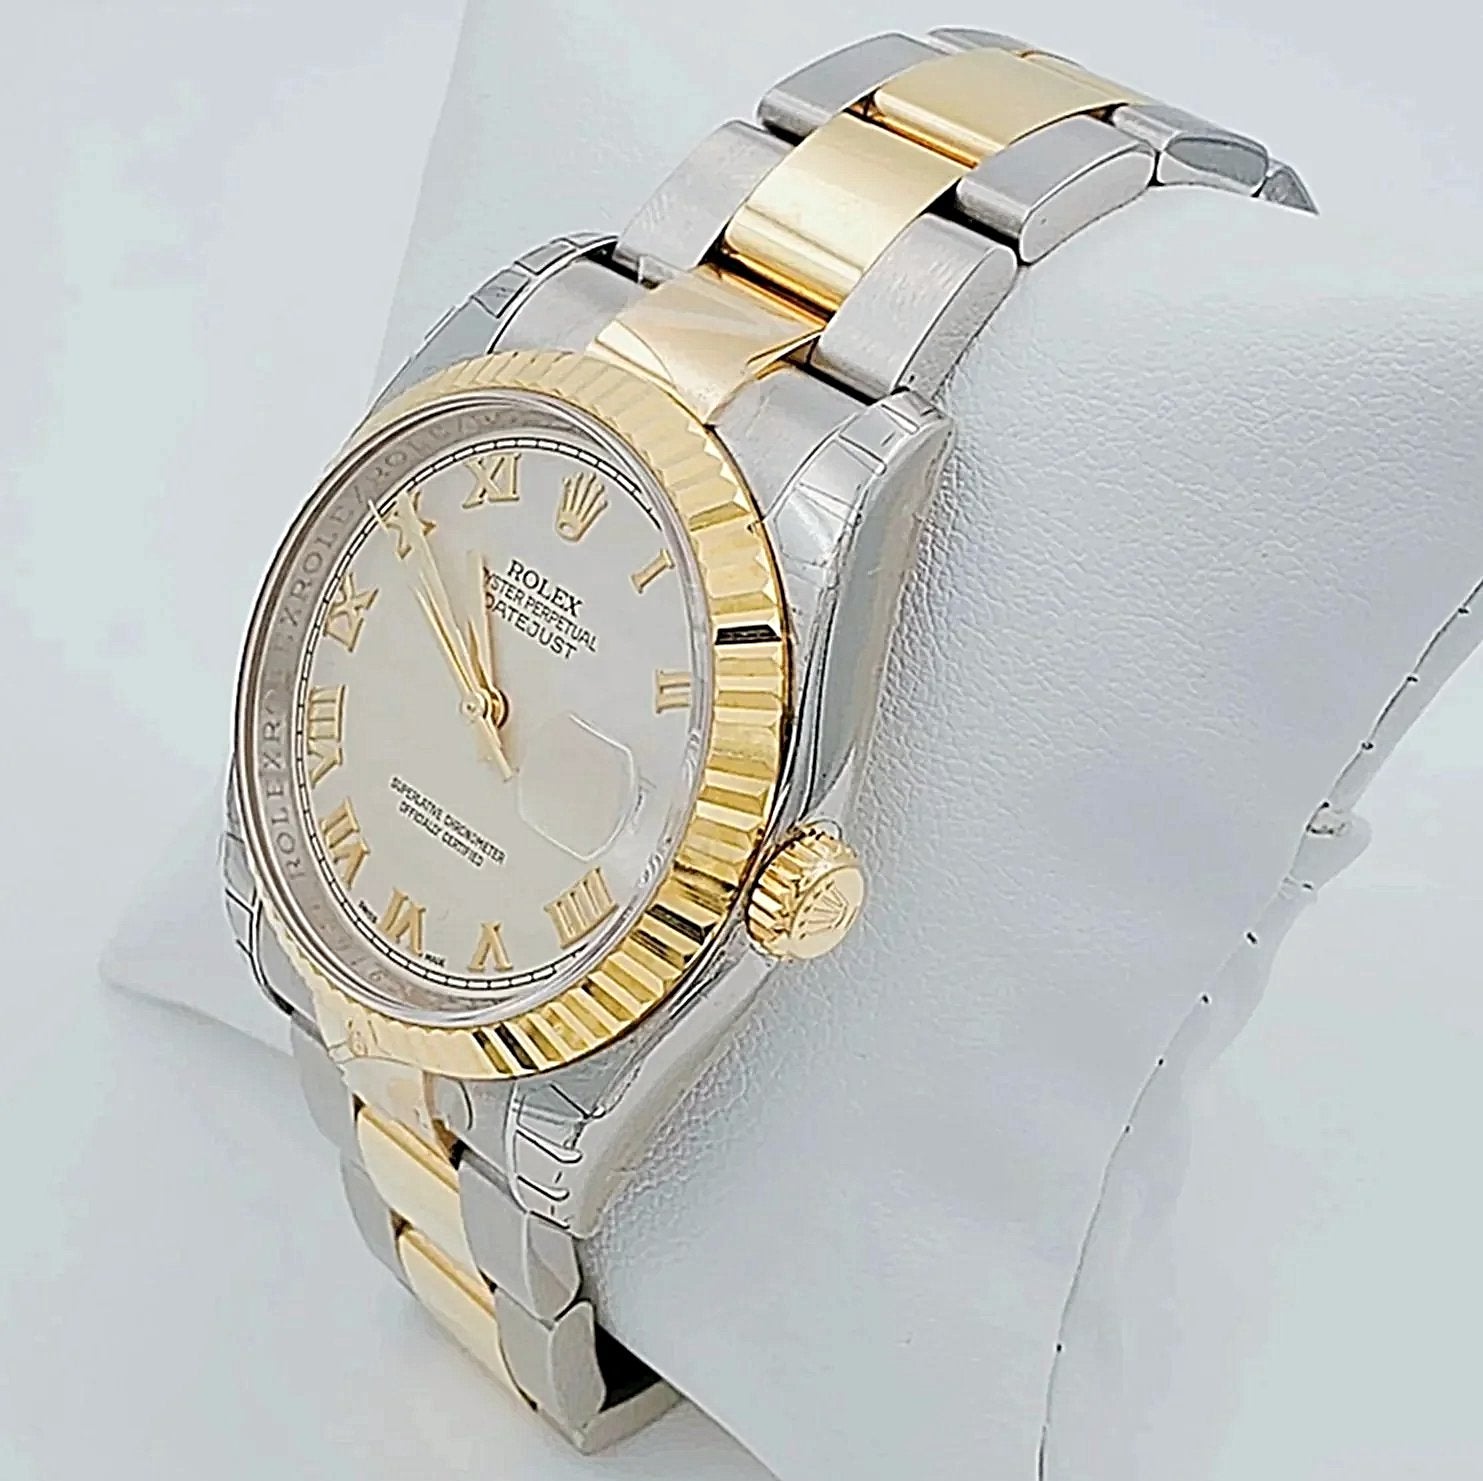 Men's Rolex DateJust 36mm Oyster Perpetual Two Tone 18k Gold / Stainless Steel Band Watch with Egg Shell Dial and Fluted Bezel. (NEW)